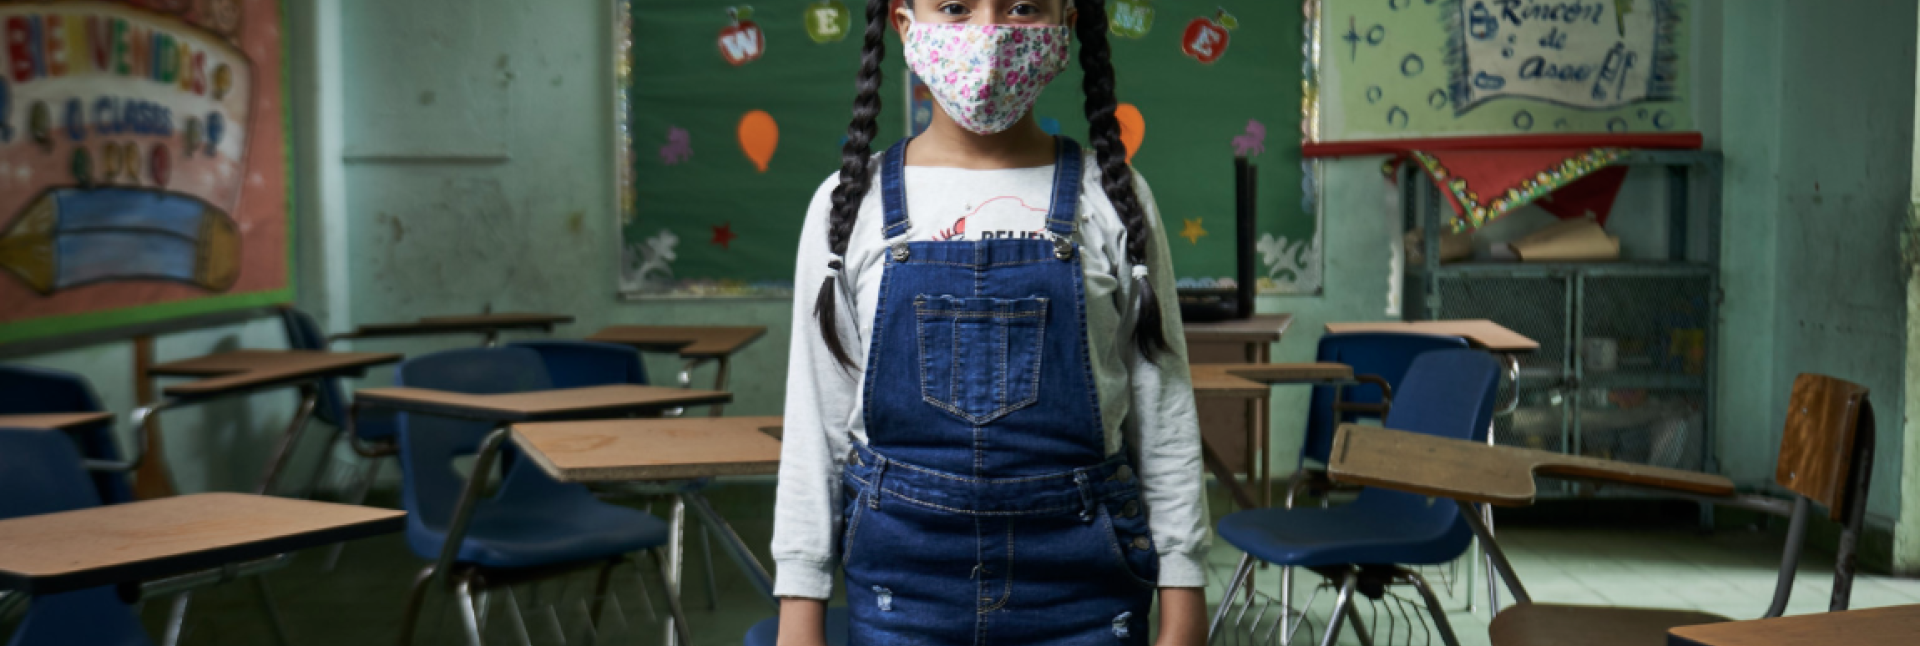 A young girl in a white face mask and blue overalls stands in a classroom. 